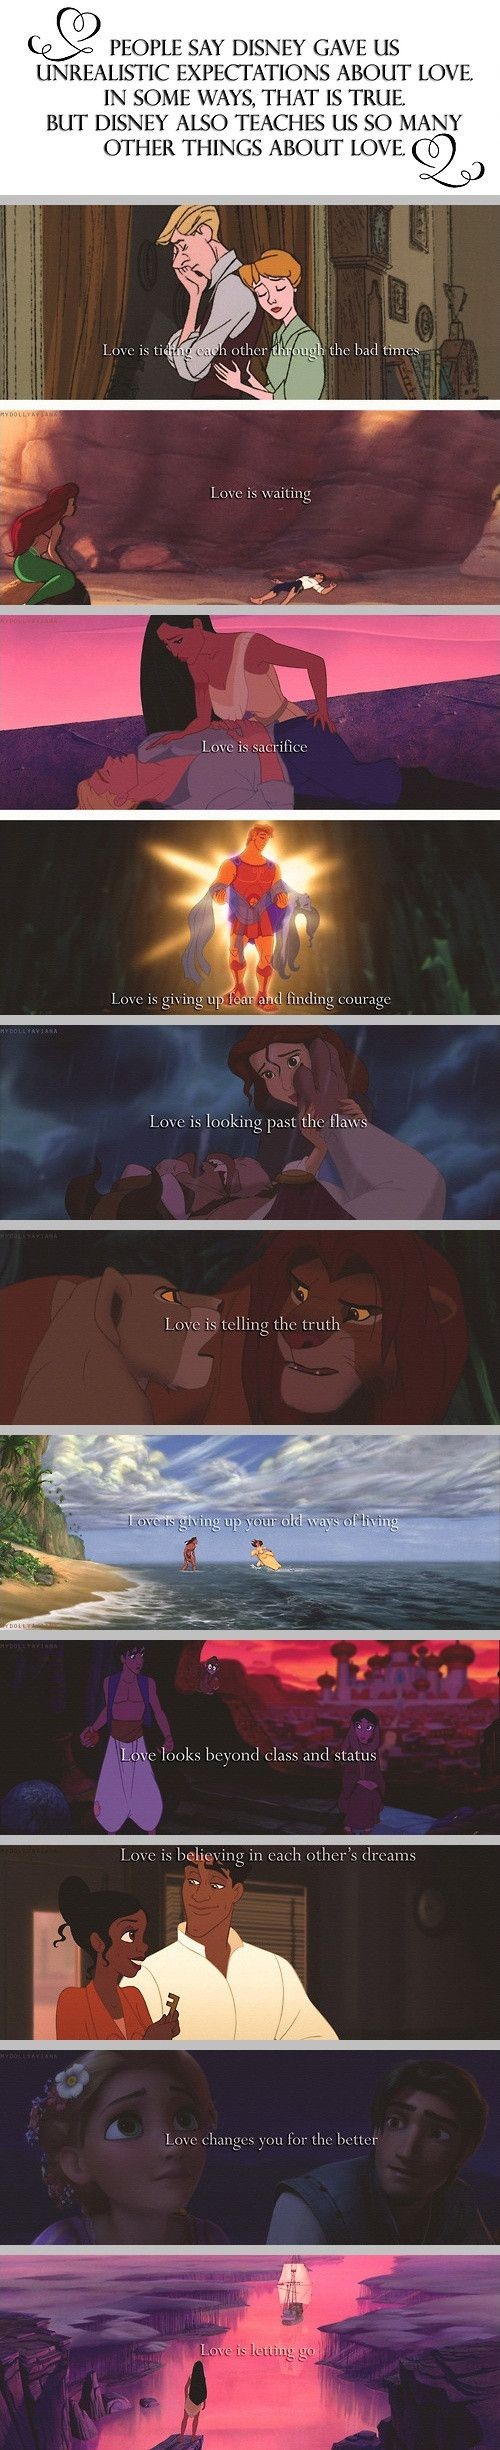 Love defined by Disney. This is perfect.